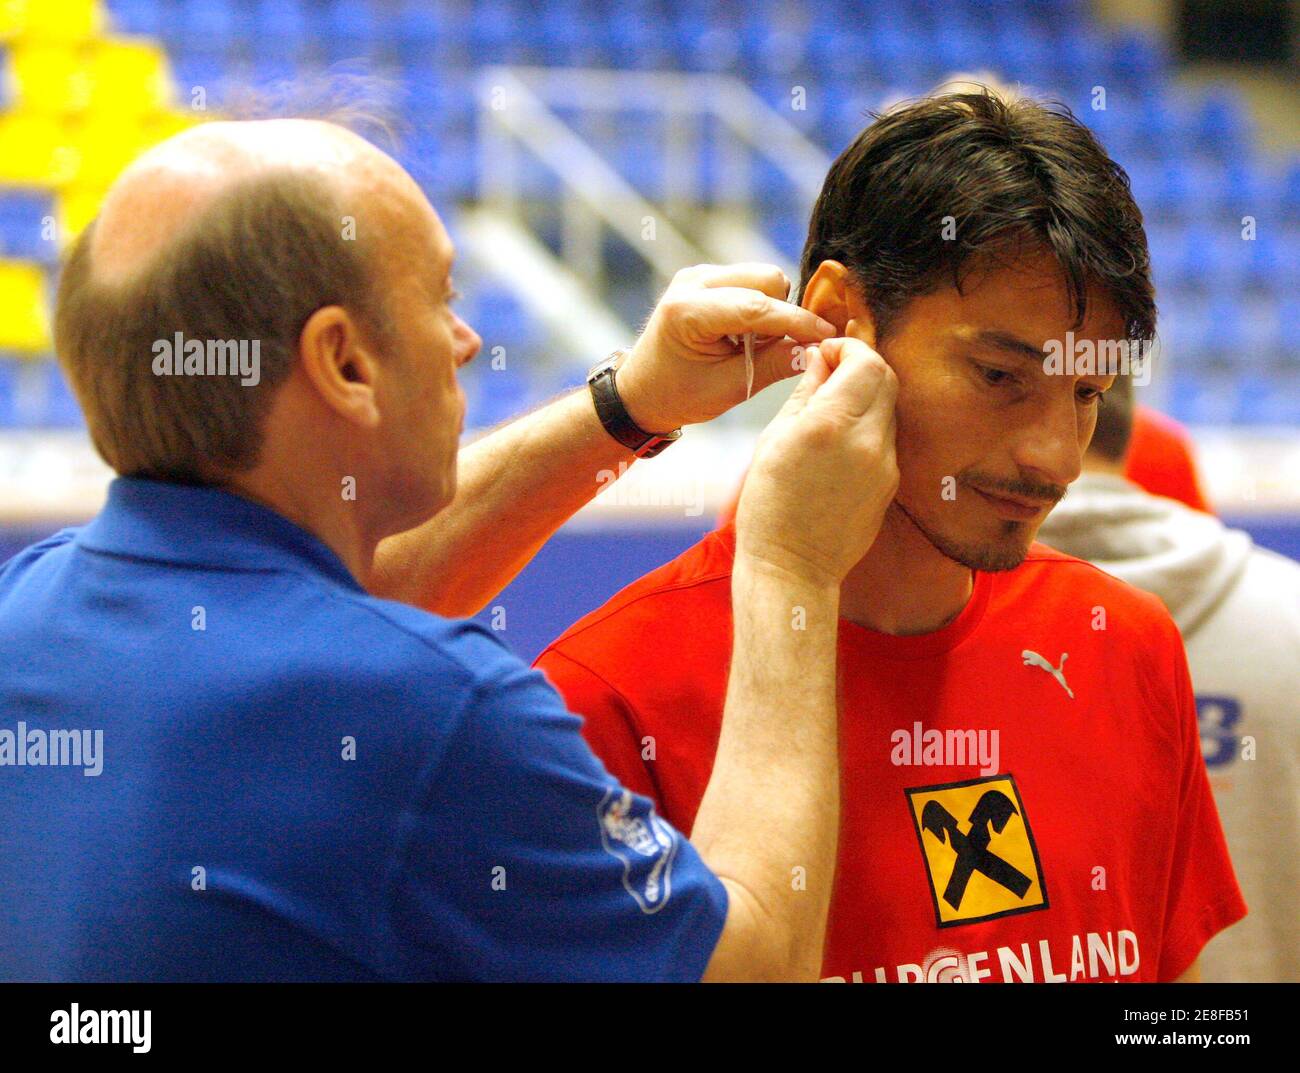 Hans Holdhaus (L) takes a blood sample for a lactate test of Austrian national team soccer player Ivica Vastic during their performance tests in Suedstadt near Vienna April 28, 2008. (EURO 2008 Preview)      REUTERS/Robert Zolles (AUSTRIA) Stock Photo